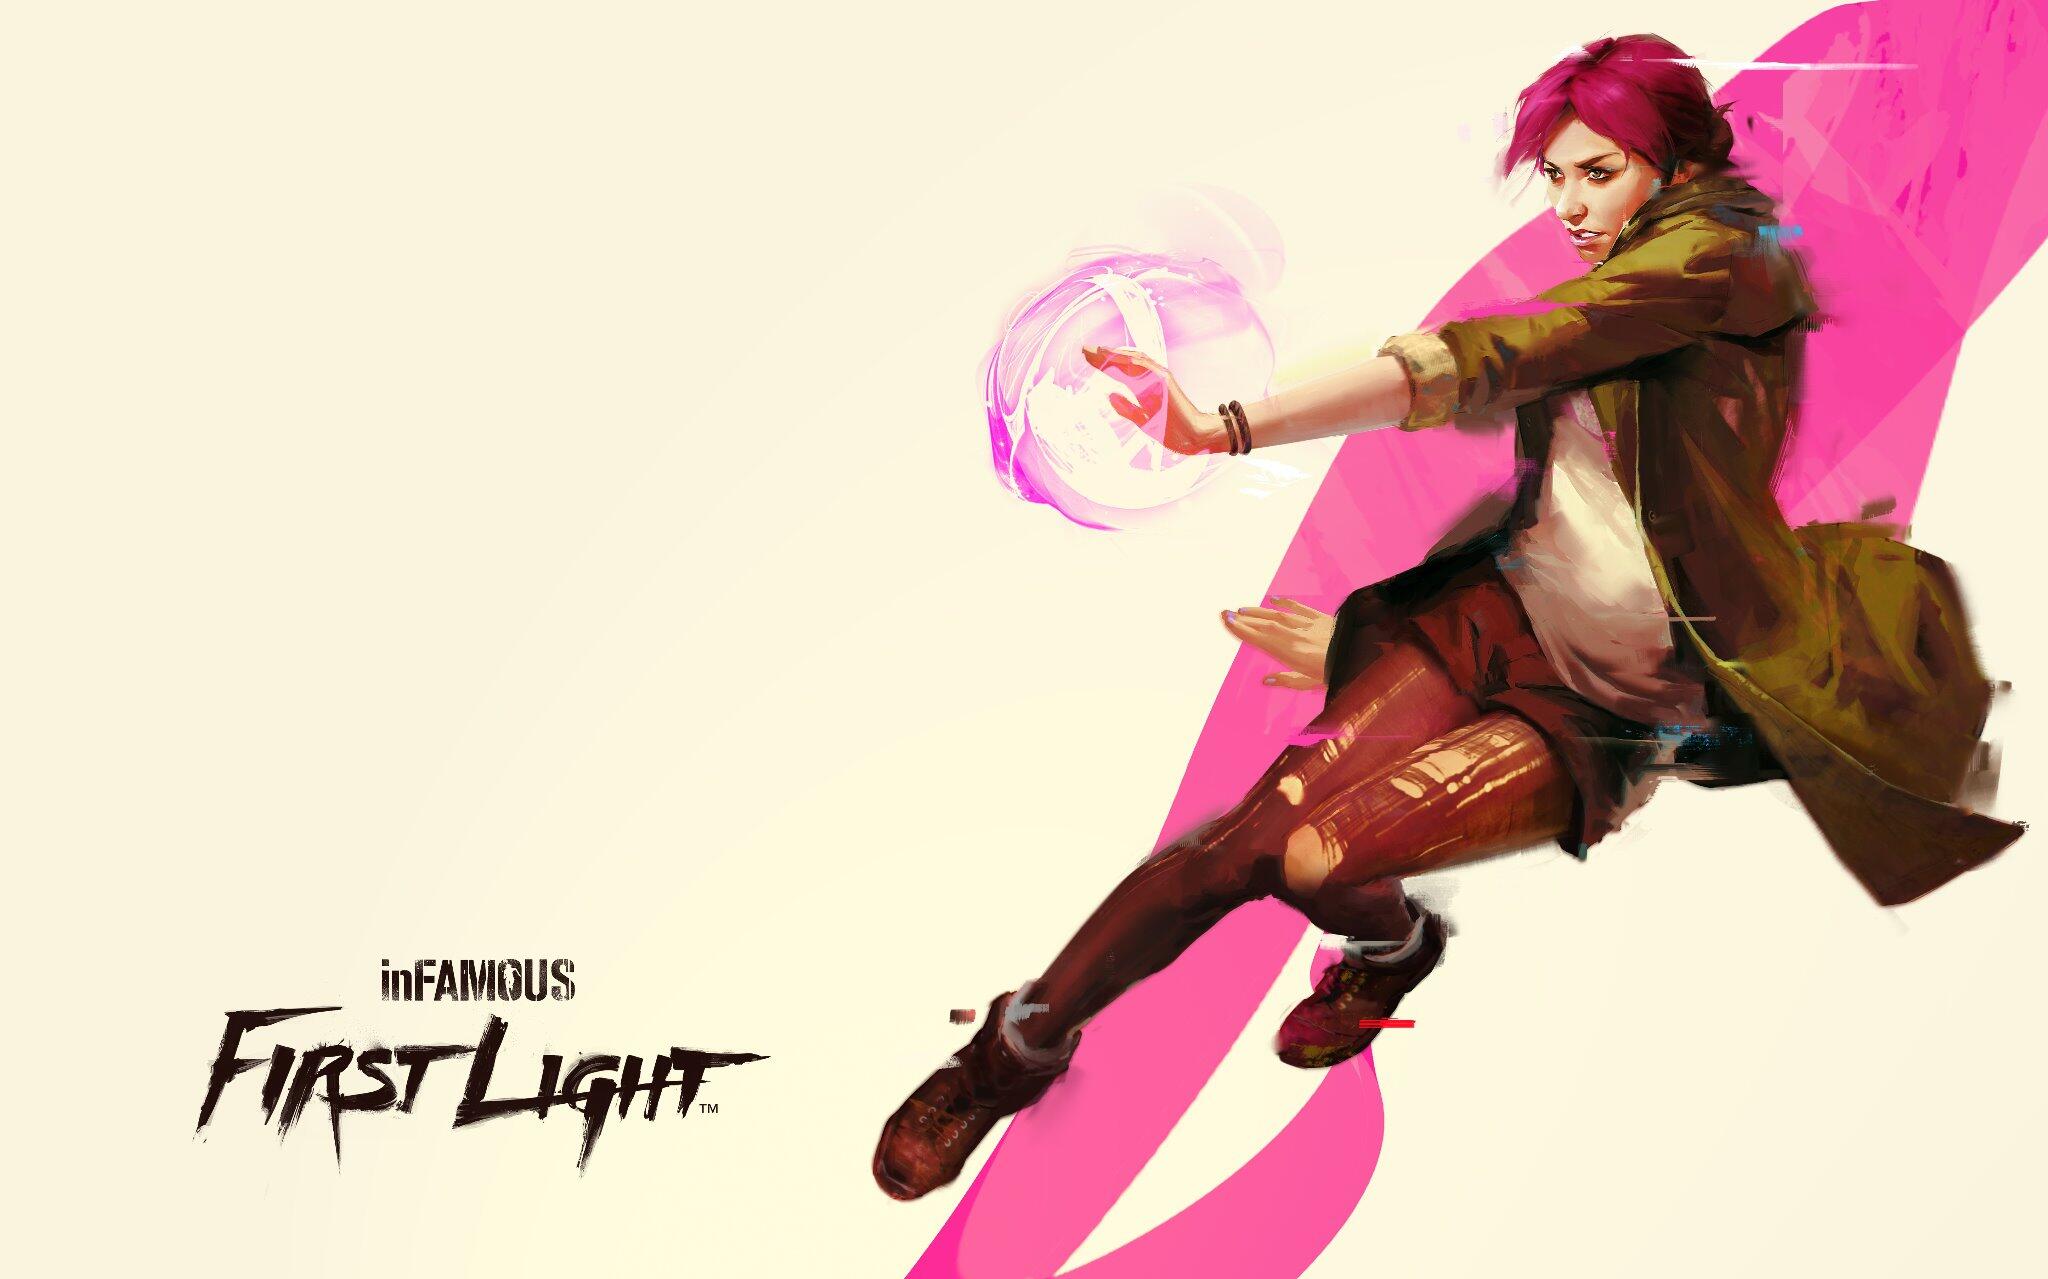 InFAMOUS: First Light #17